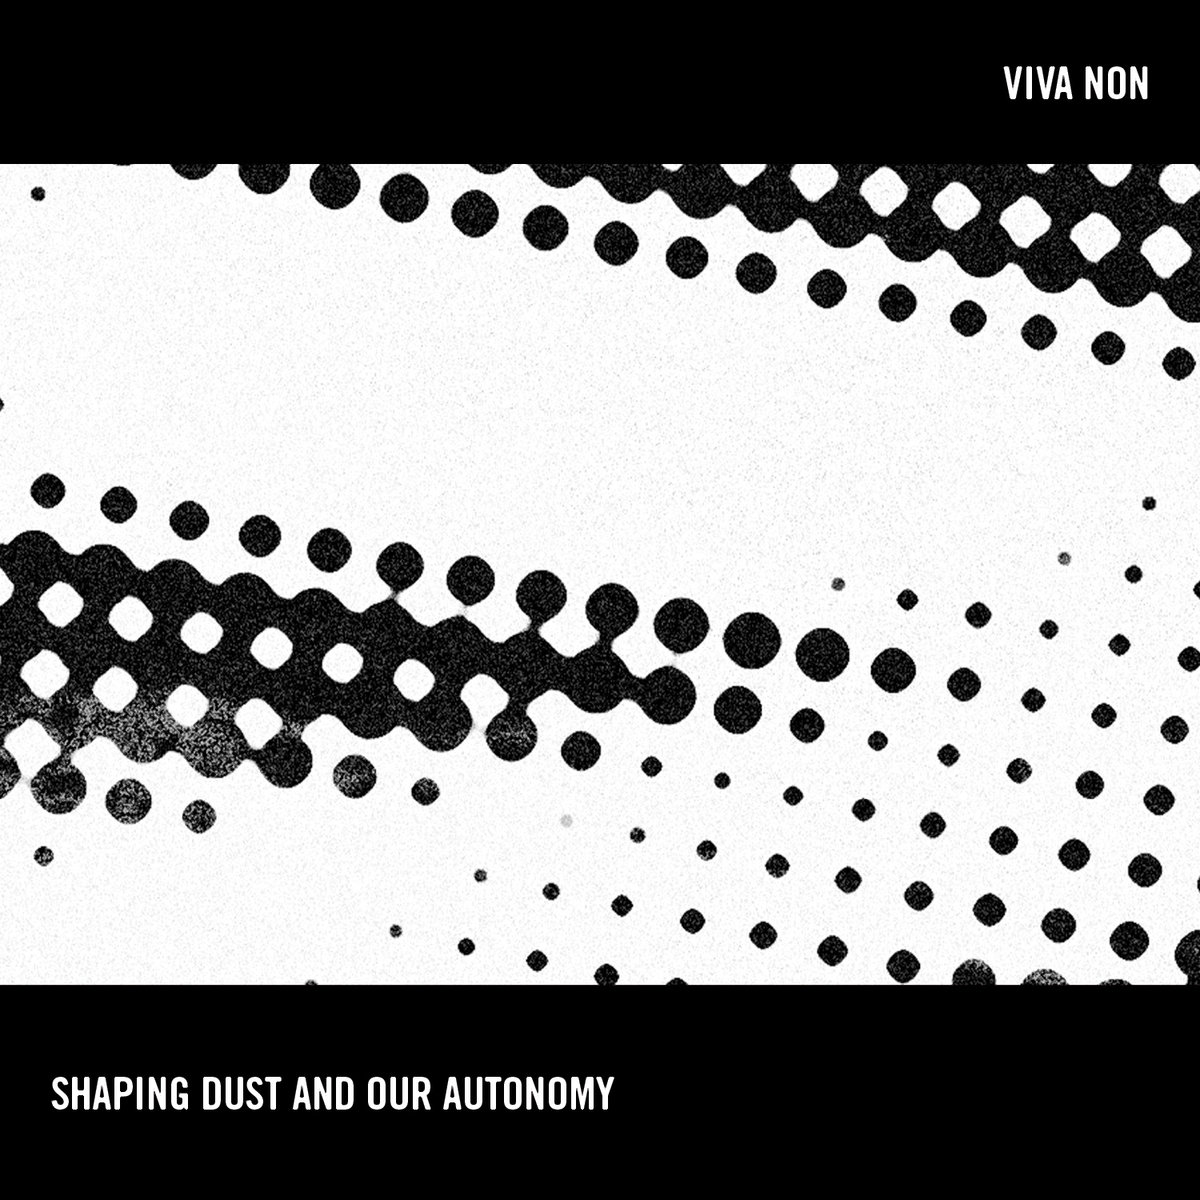 Viva Non, “Shaping Dust And Our Autonomy”